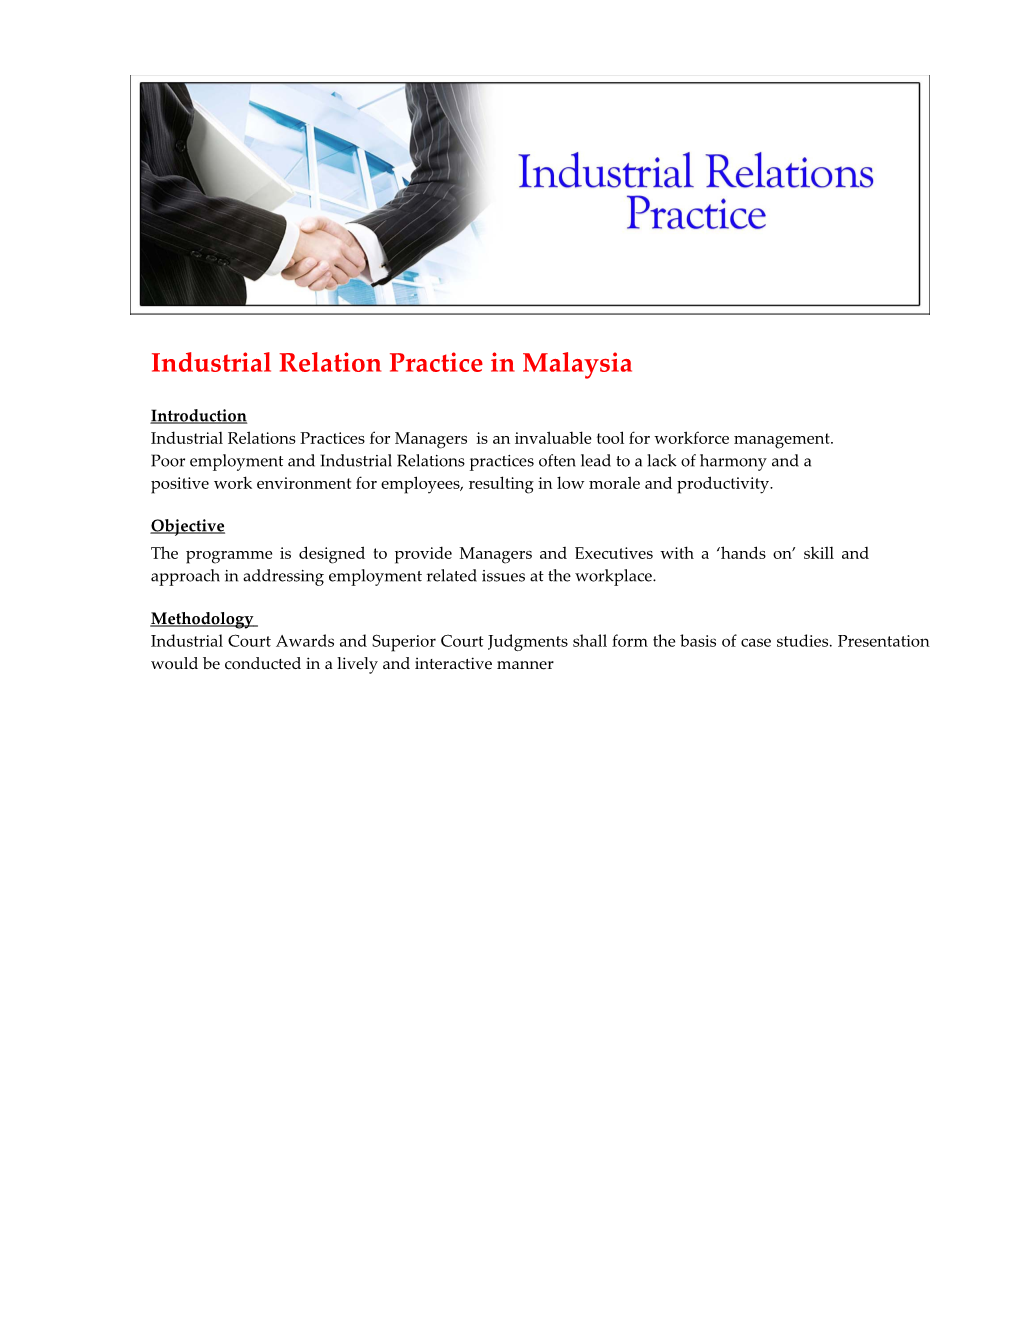 Industrial Relation Practice in Malaysia